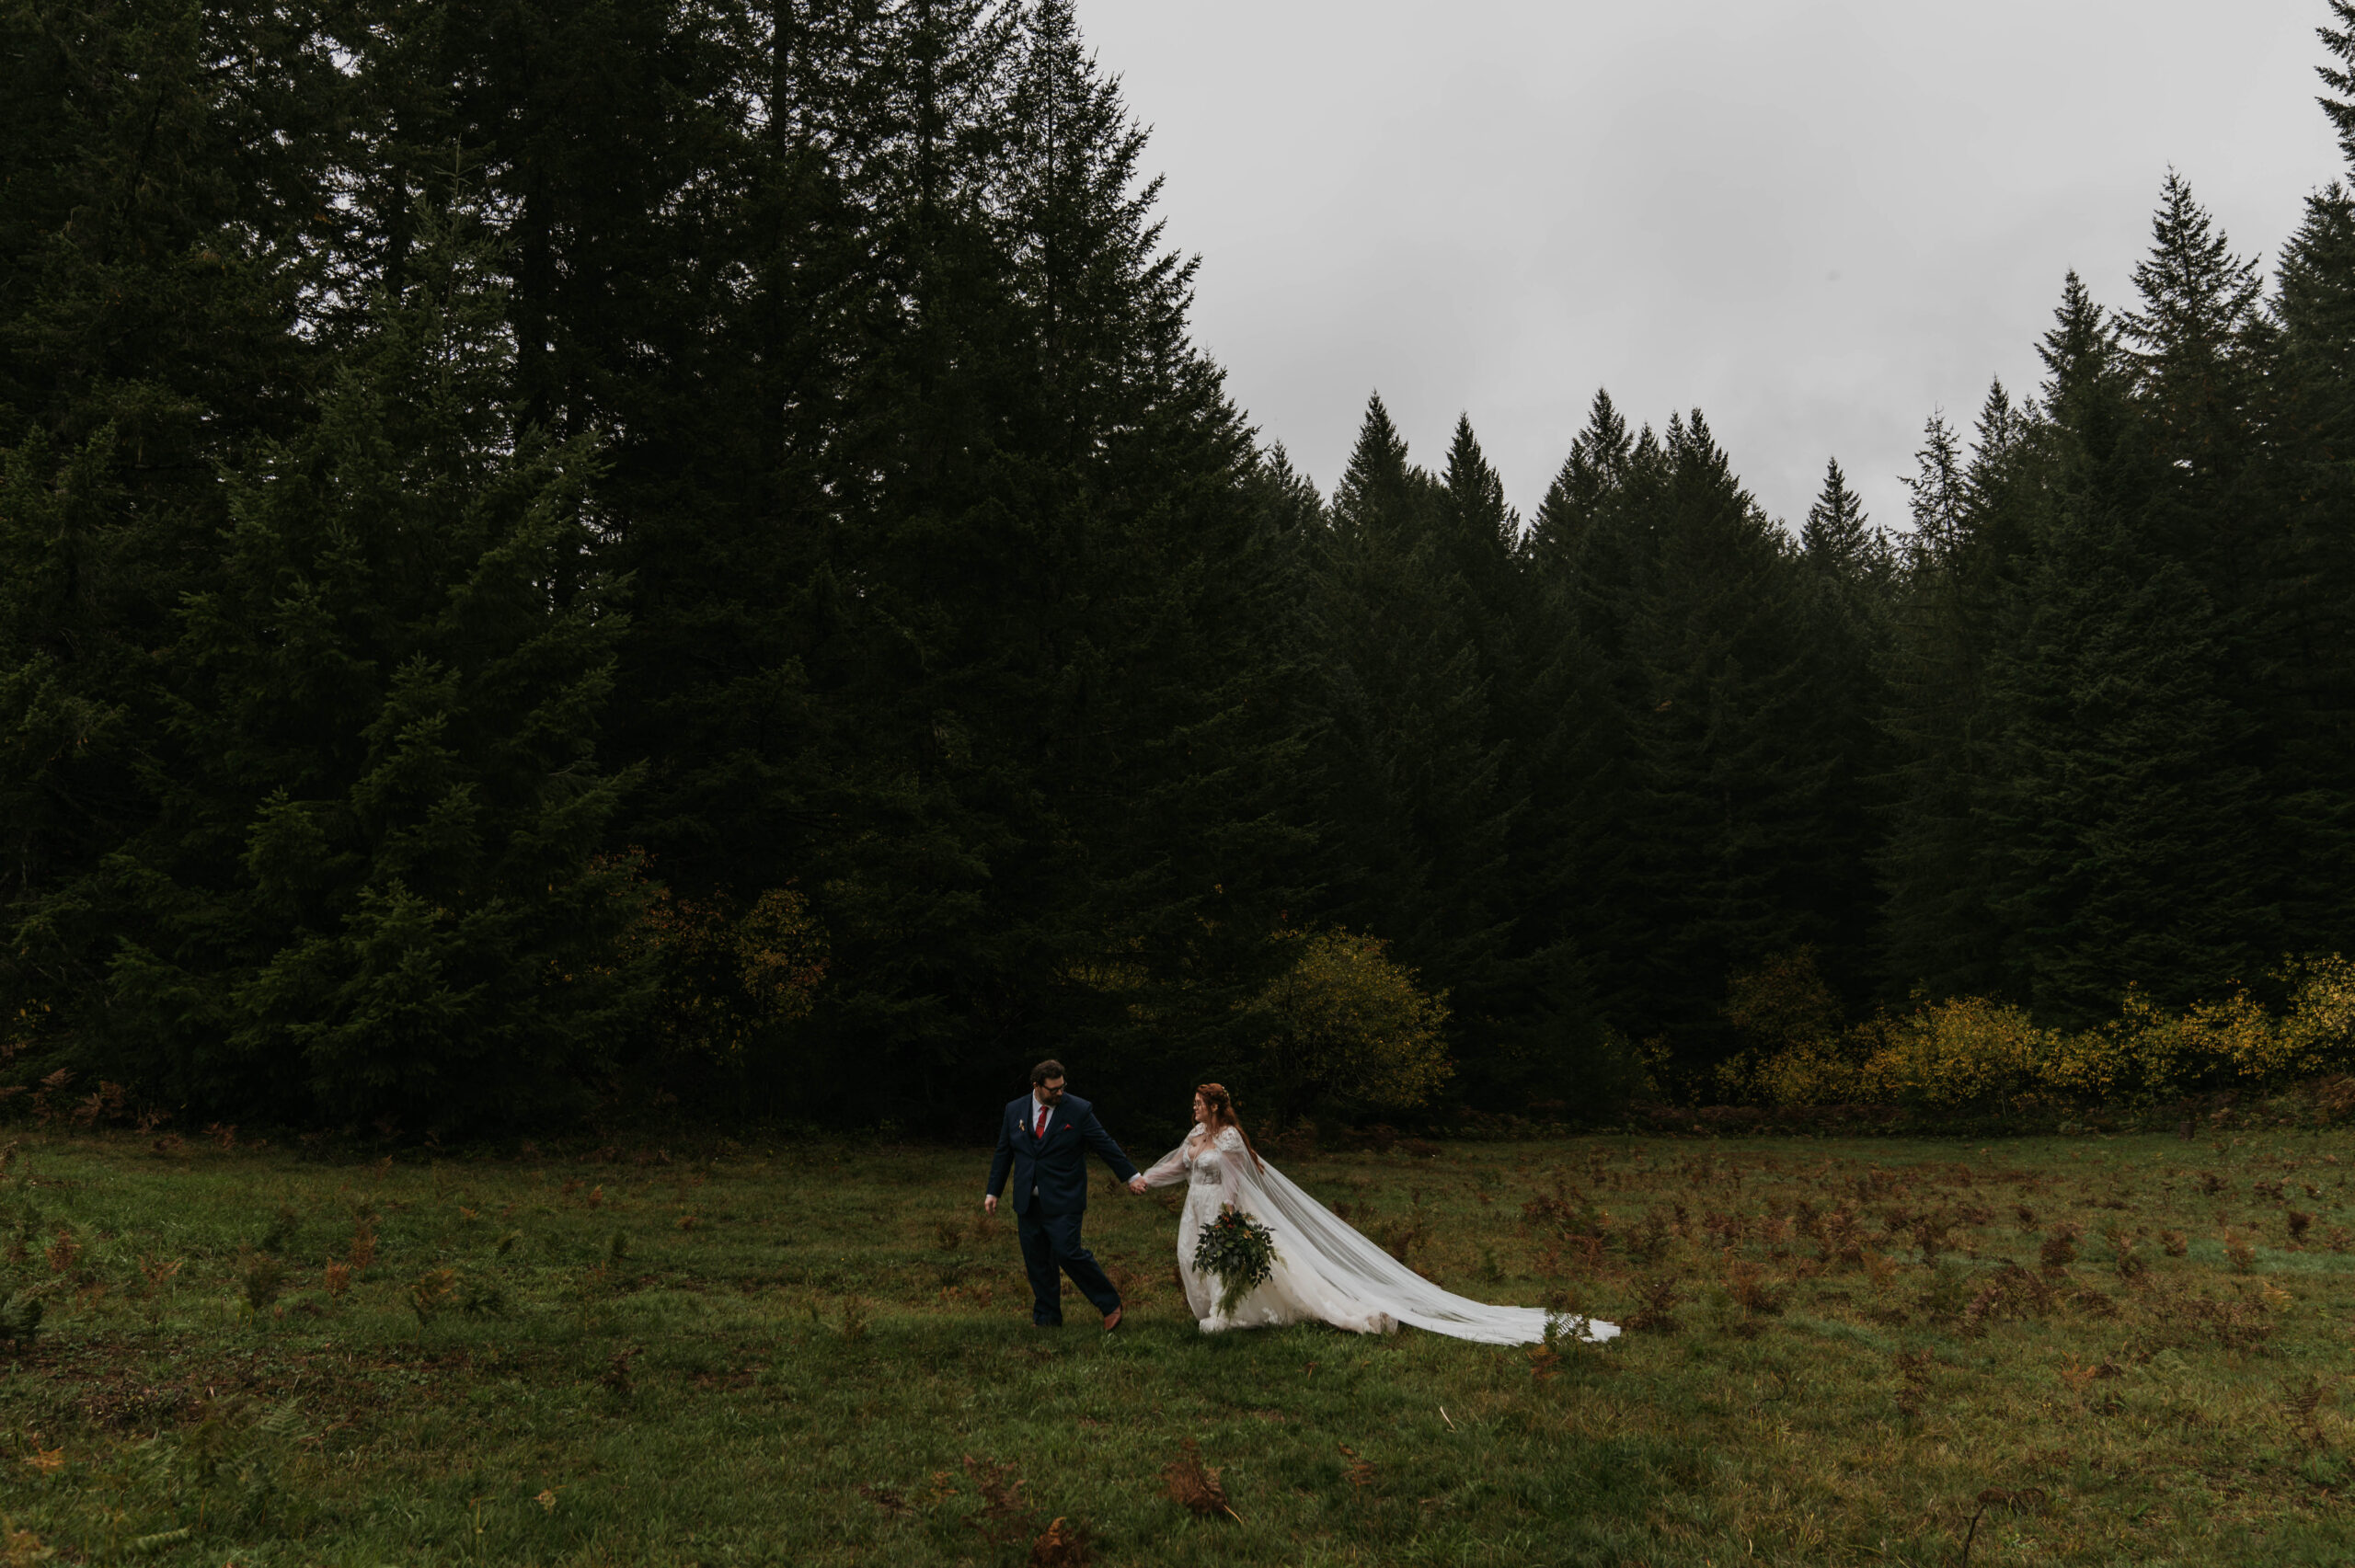 bride and groom holding hands walking on grass with a forest in the background